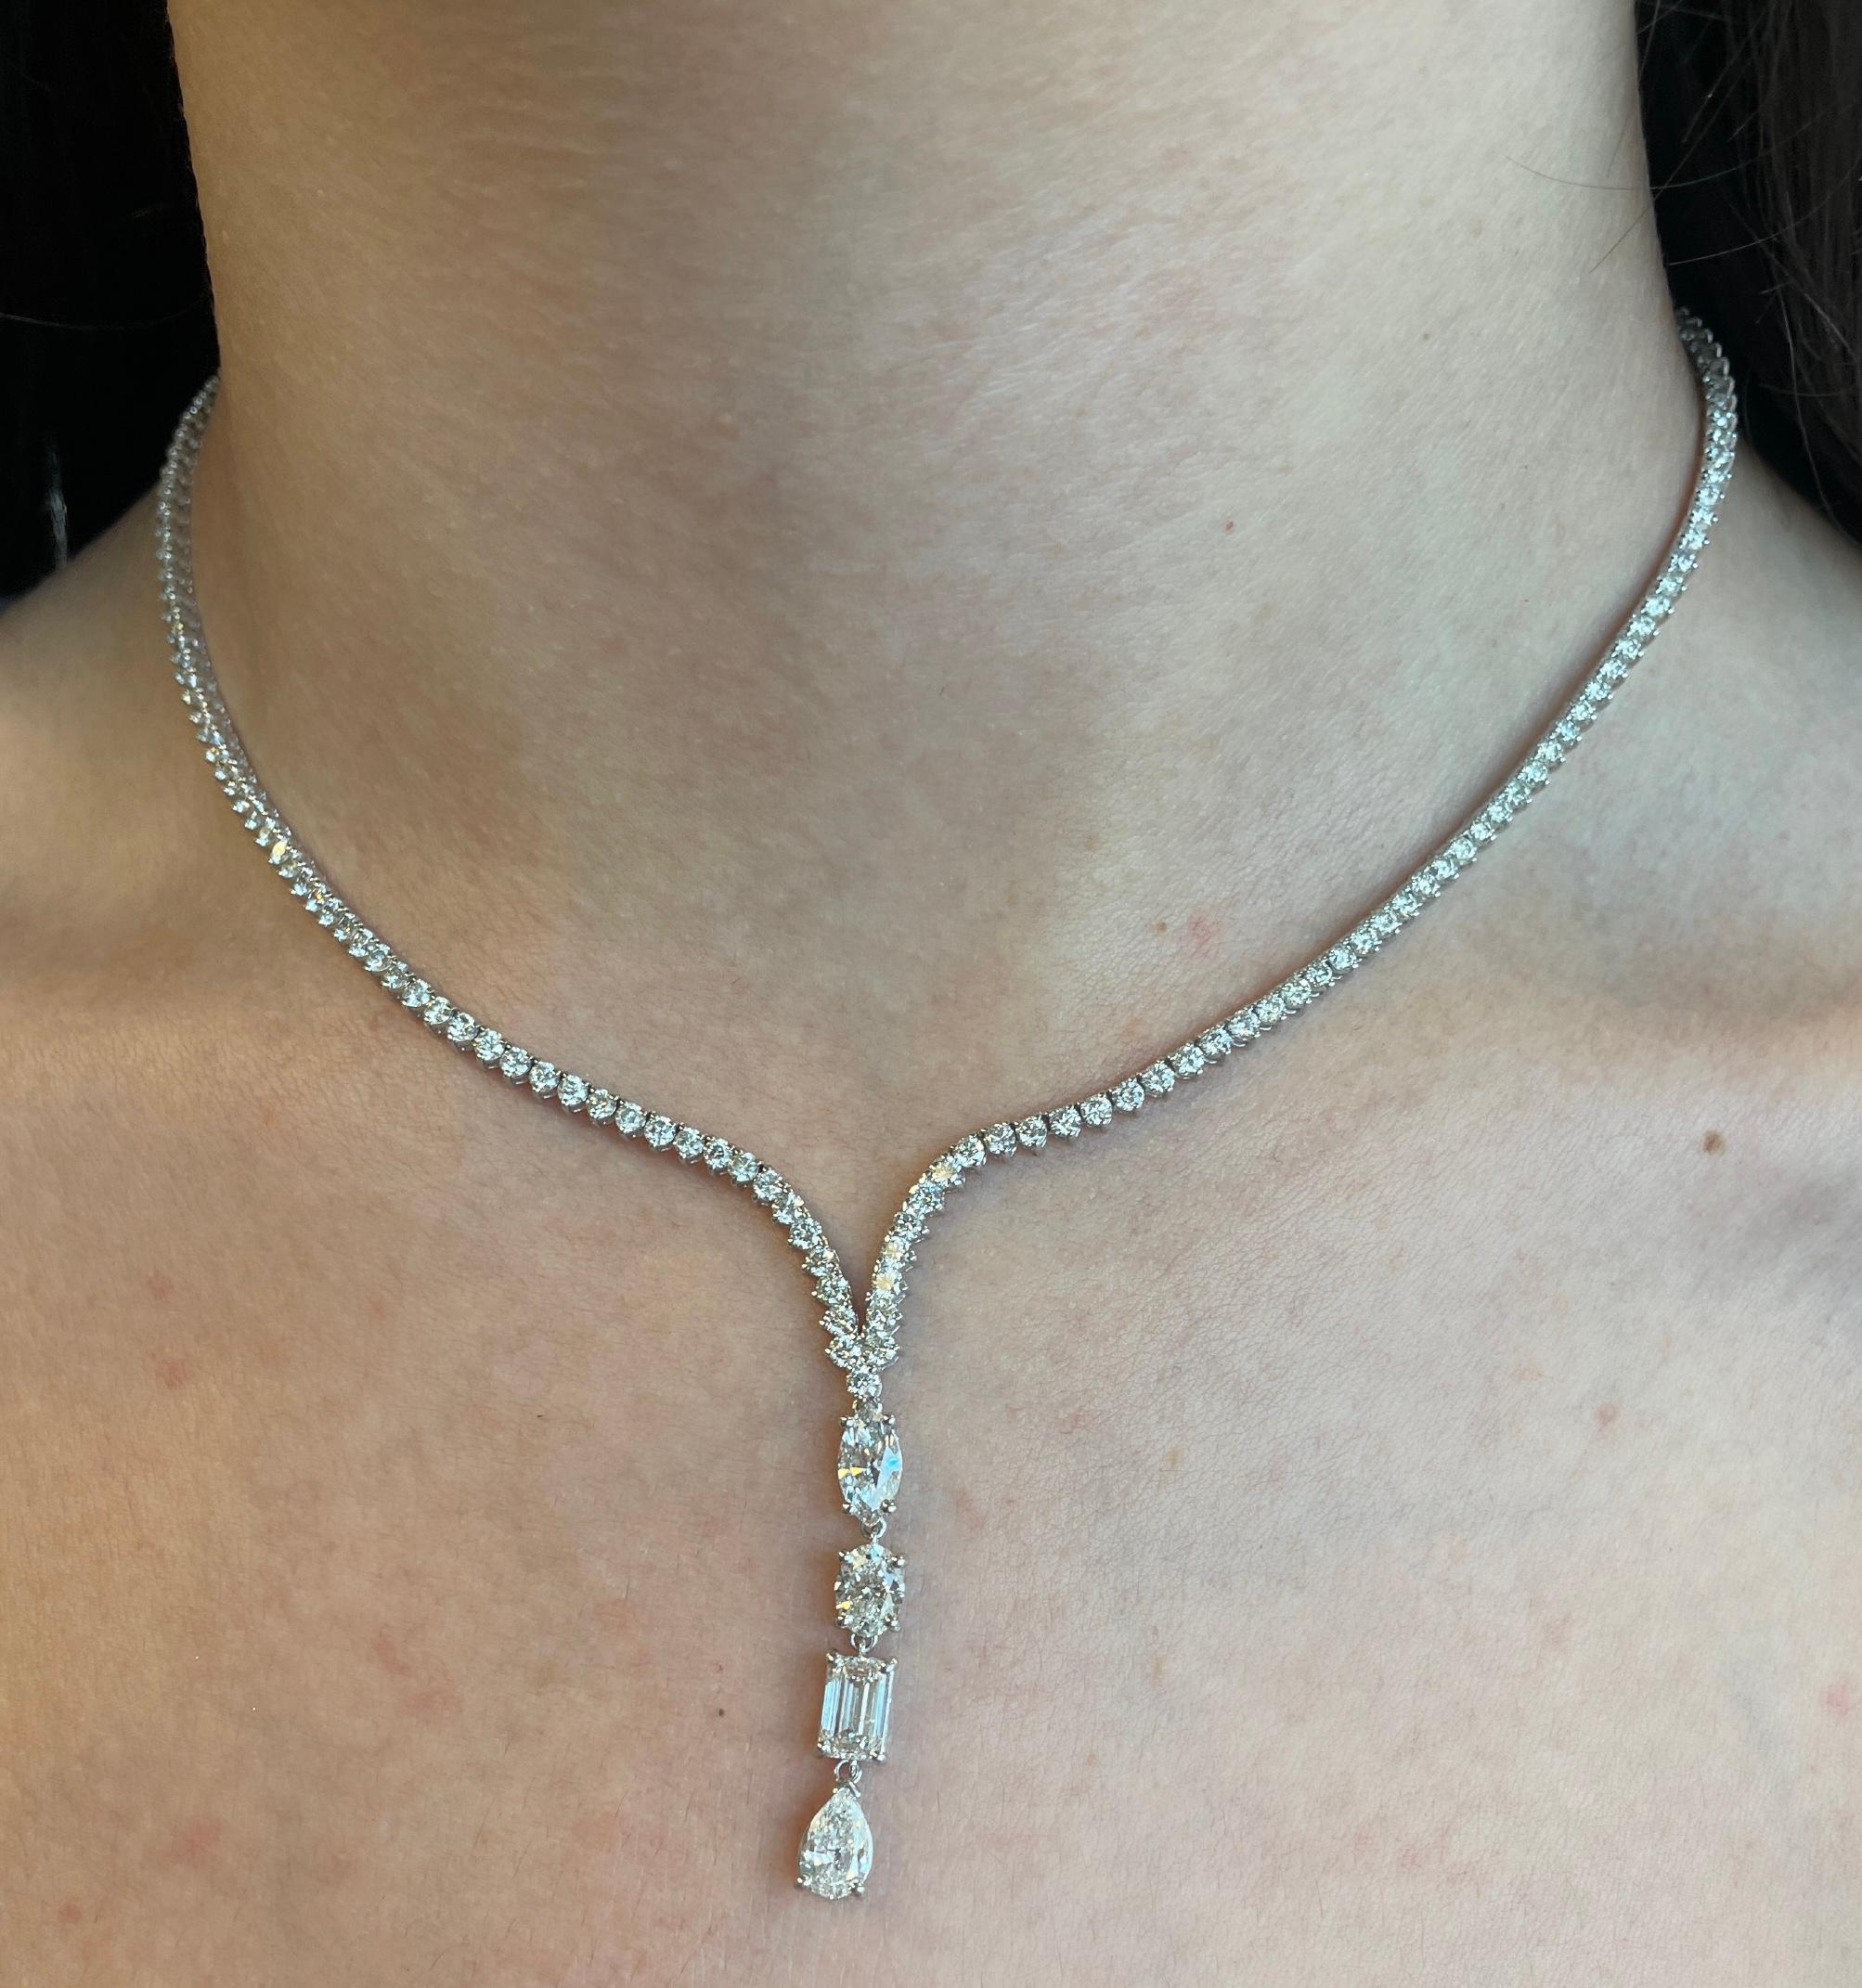 Exquisite and timeless diamonds drop tennis necklace. High jewelry by Alexander Beverly Hills.
Center marquise, oval, emerald cut and pear diamond, 2.22 carats. Approximately G/H color and VS clarity. 179 round brilliant diamonds, 6.42 carats total.